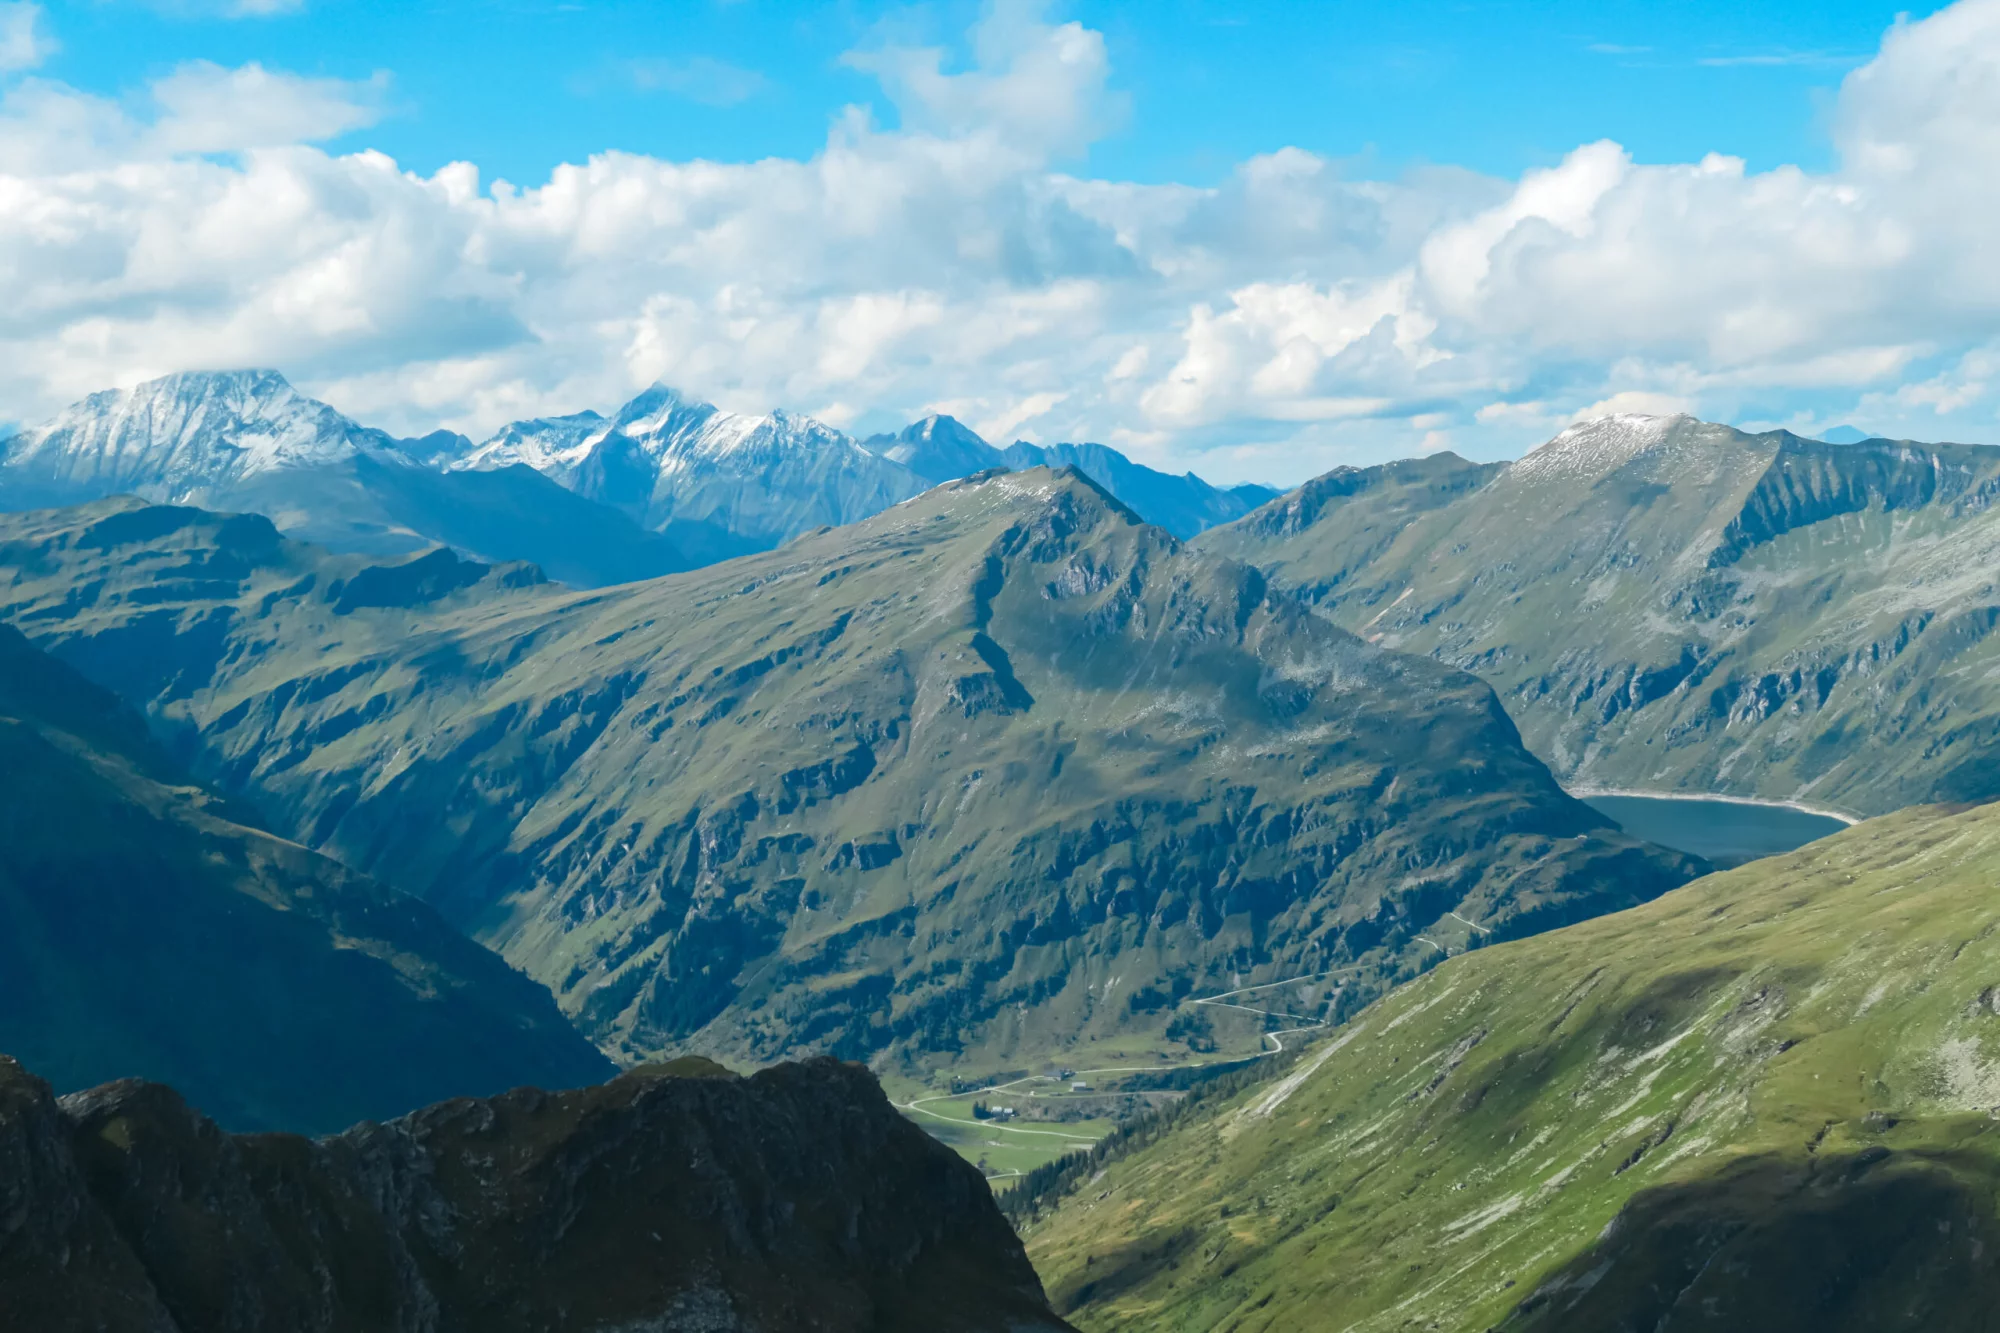 Panoramic view of majestic snow capped mountain peaks in Glockner group in High Tauern National Park, Carinthia Salzburg, Austria. Wanderlust in Austrian Alps. Looking from mount Greilkopf. Escapism